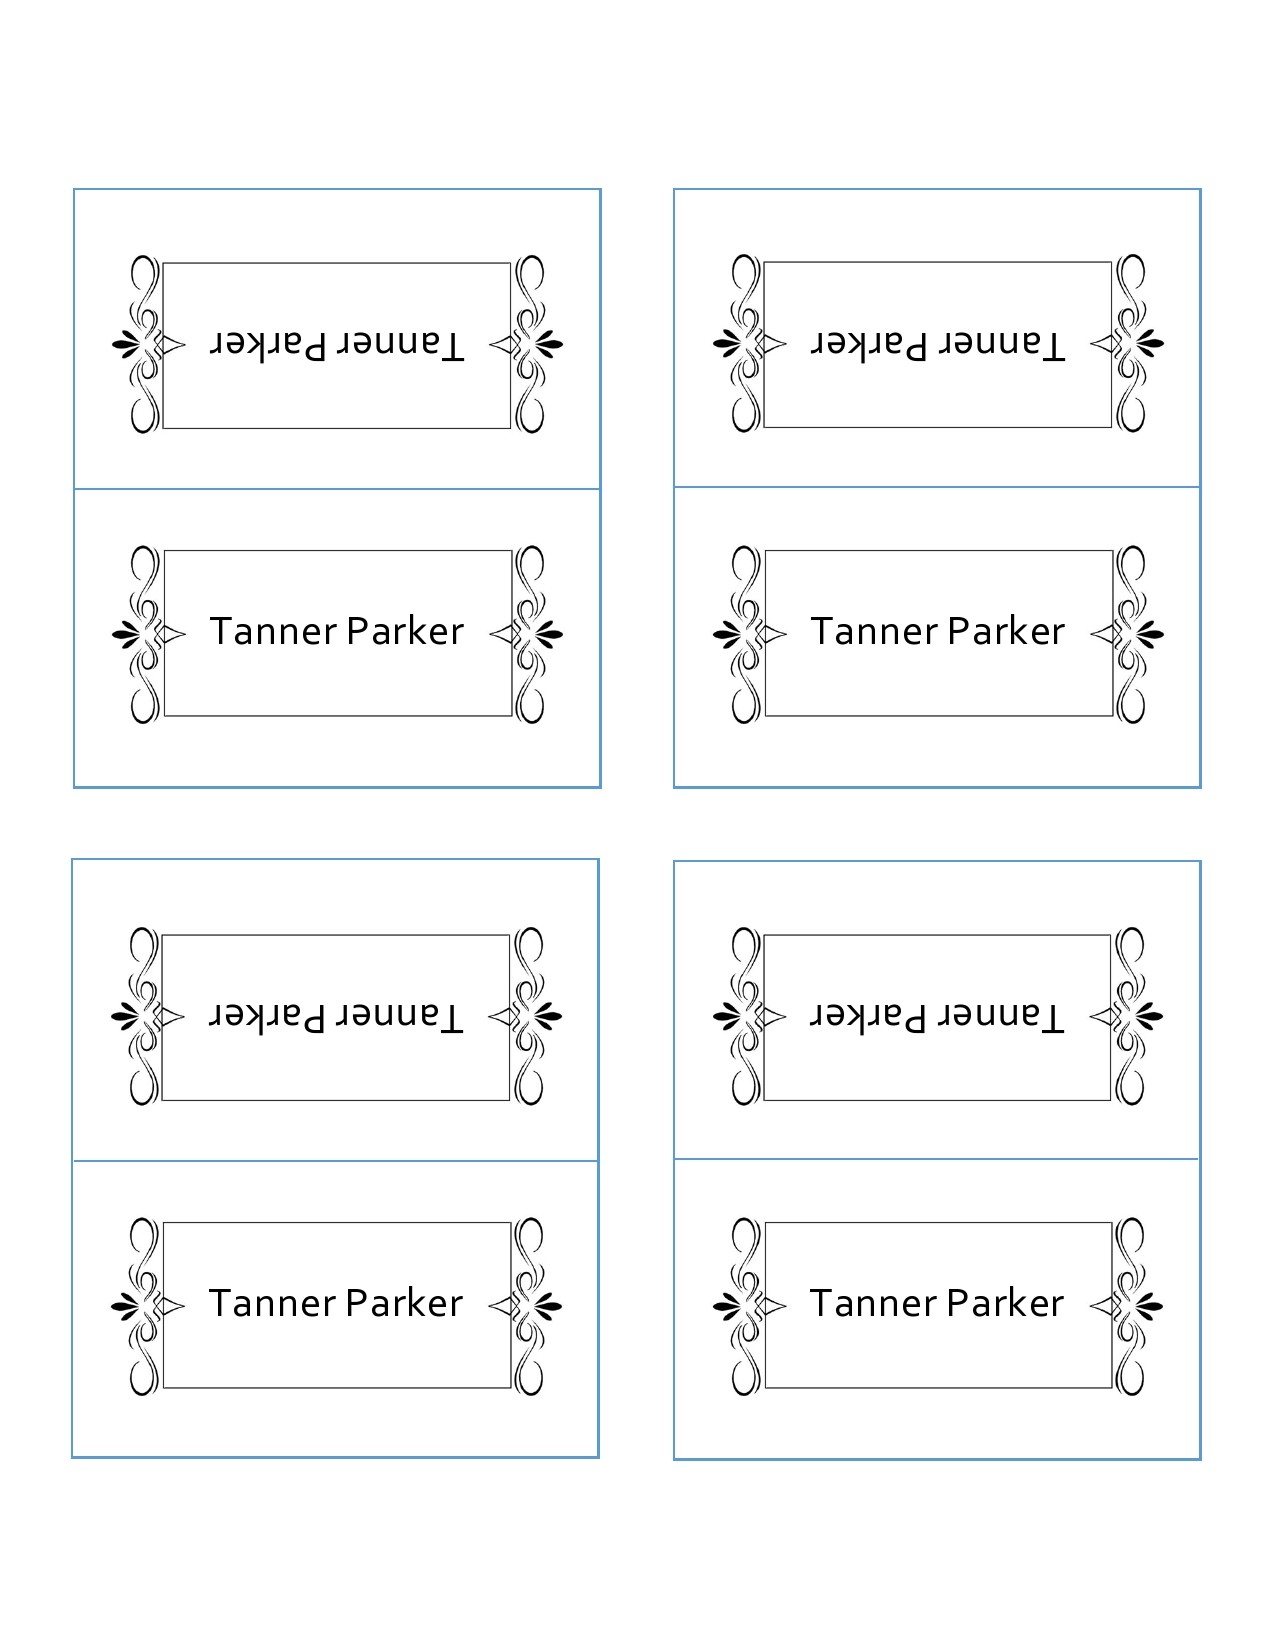 The Fastest Place Card Templates 22 Per Sheet In Place Card Size Template